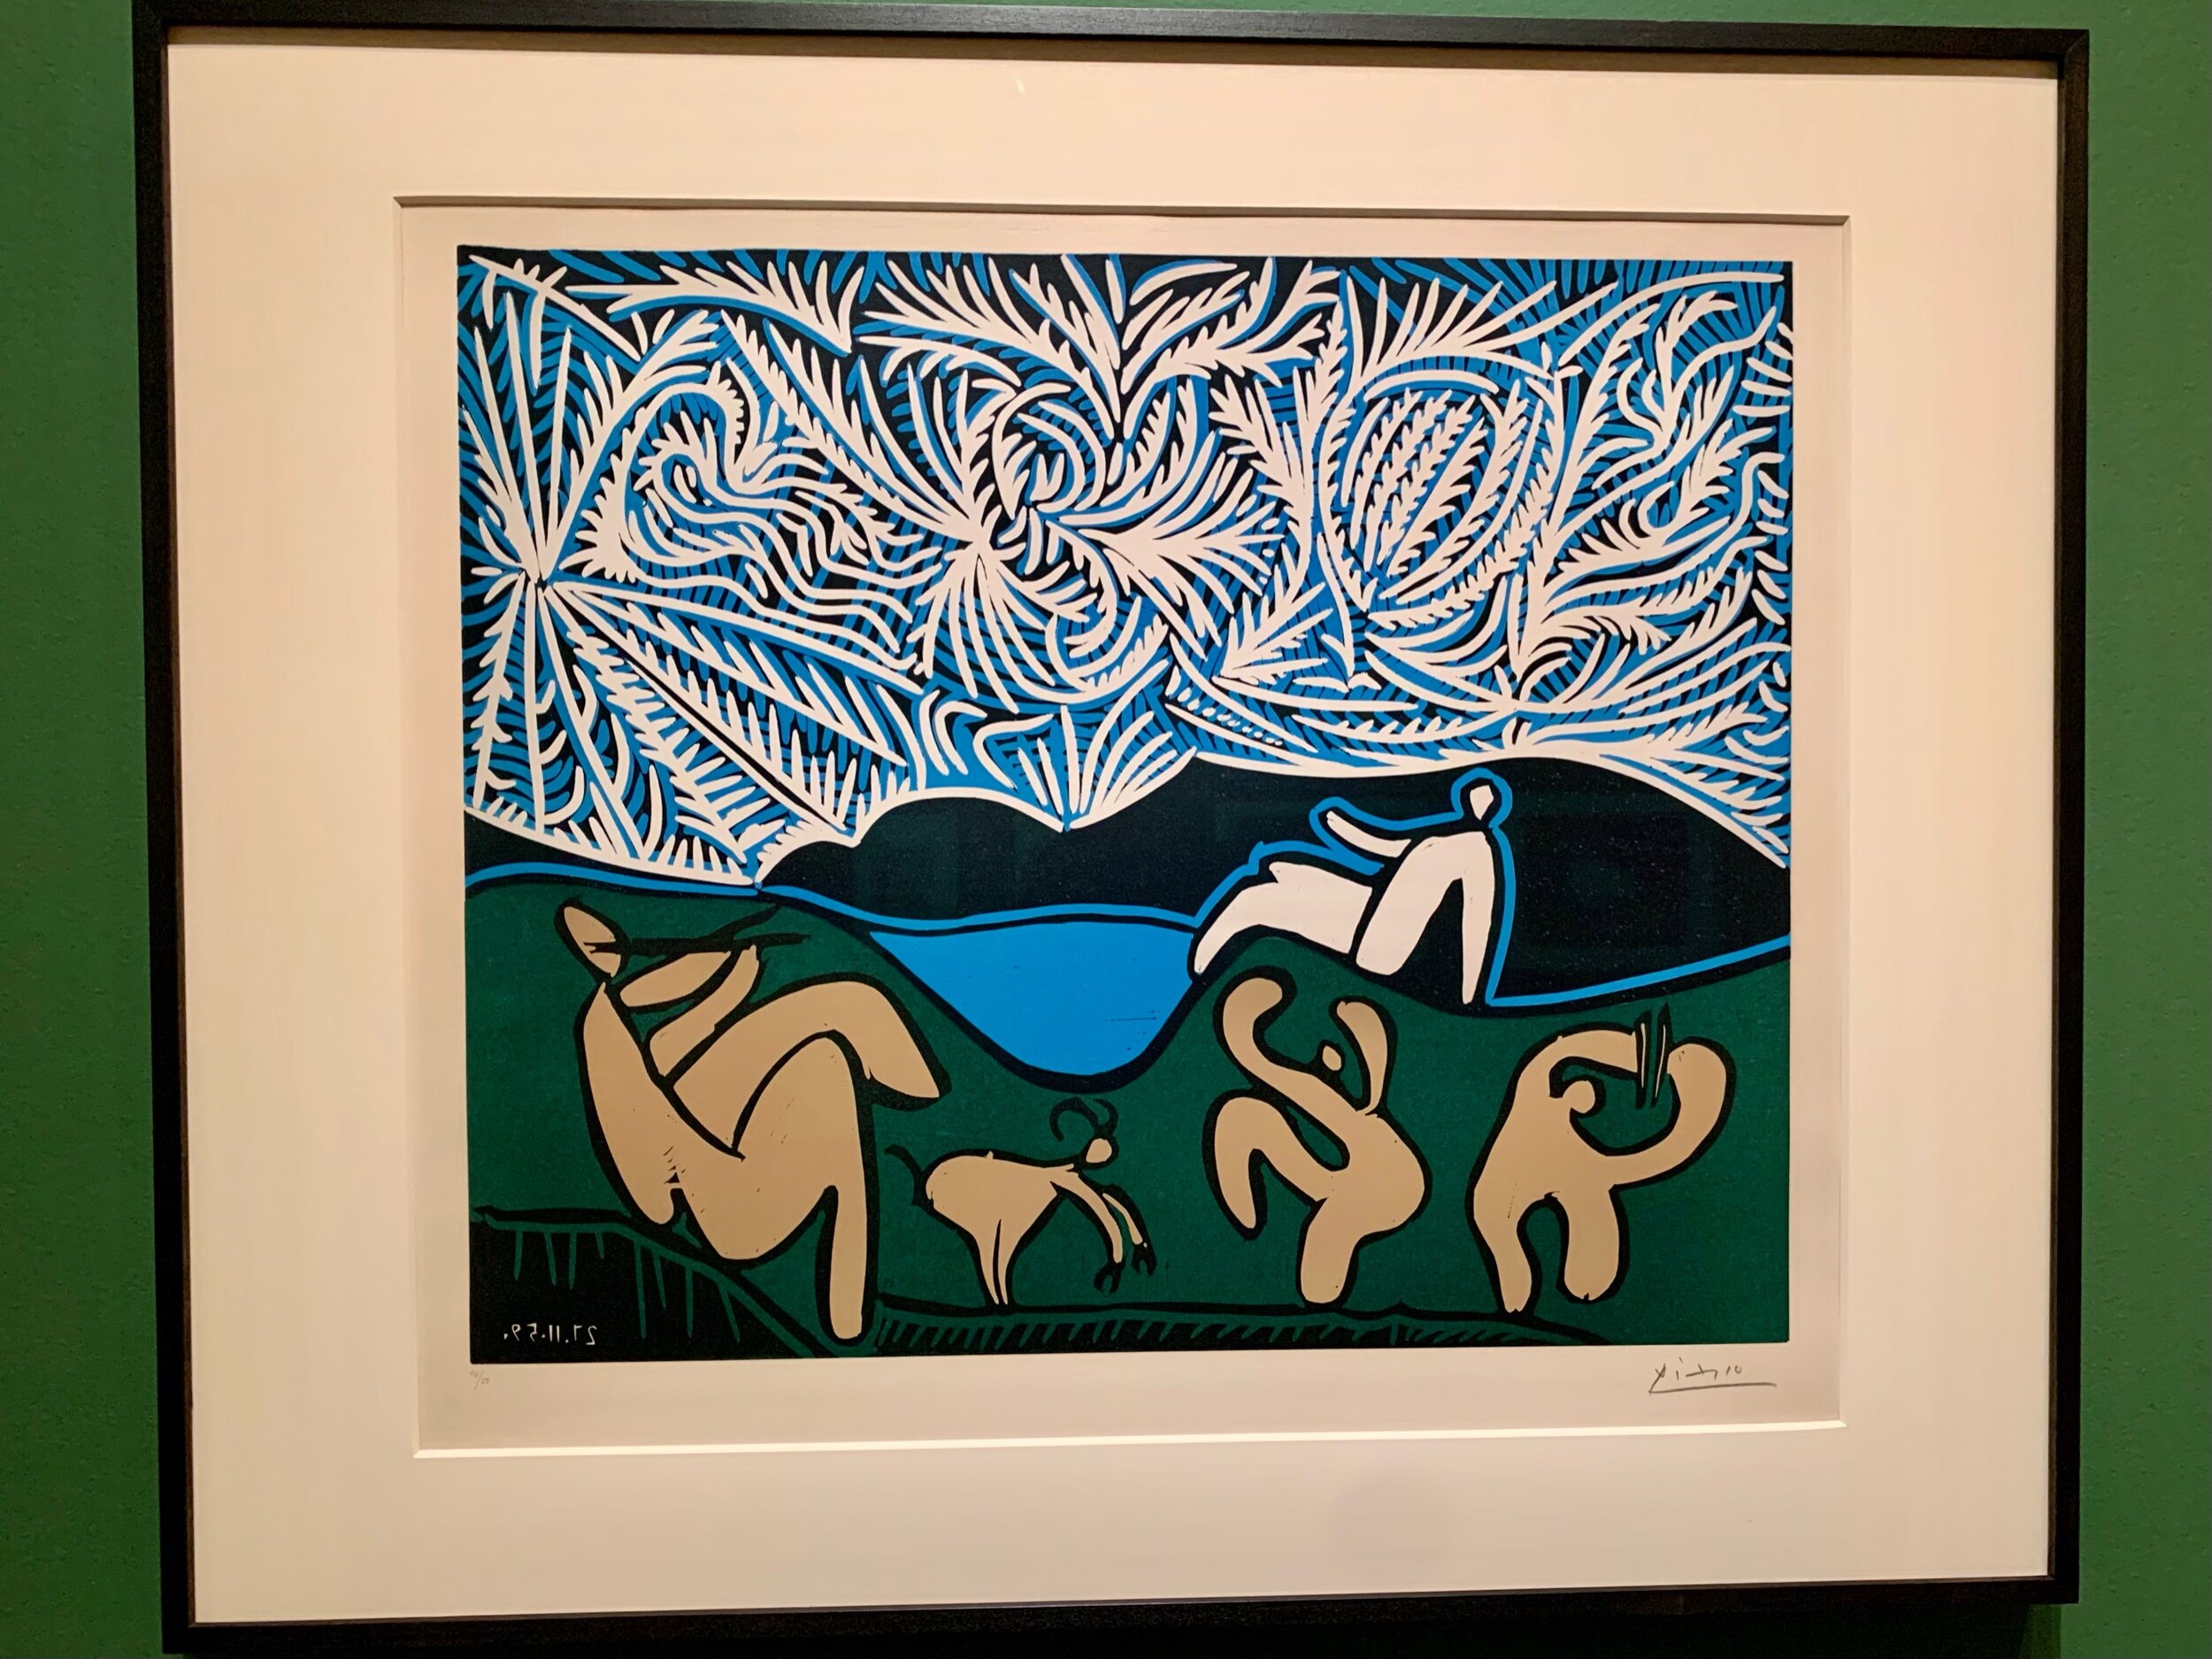    Bacchanal with Young Goat and Onlooker , 1959 Linocut  